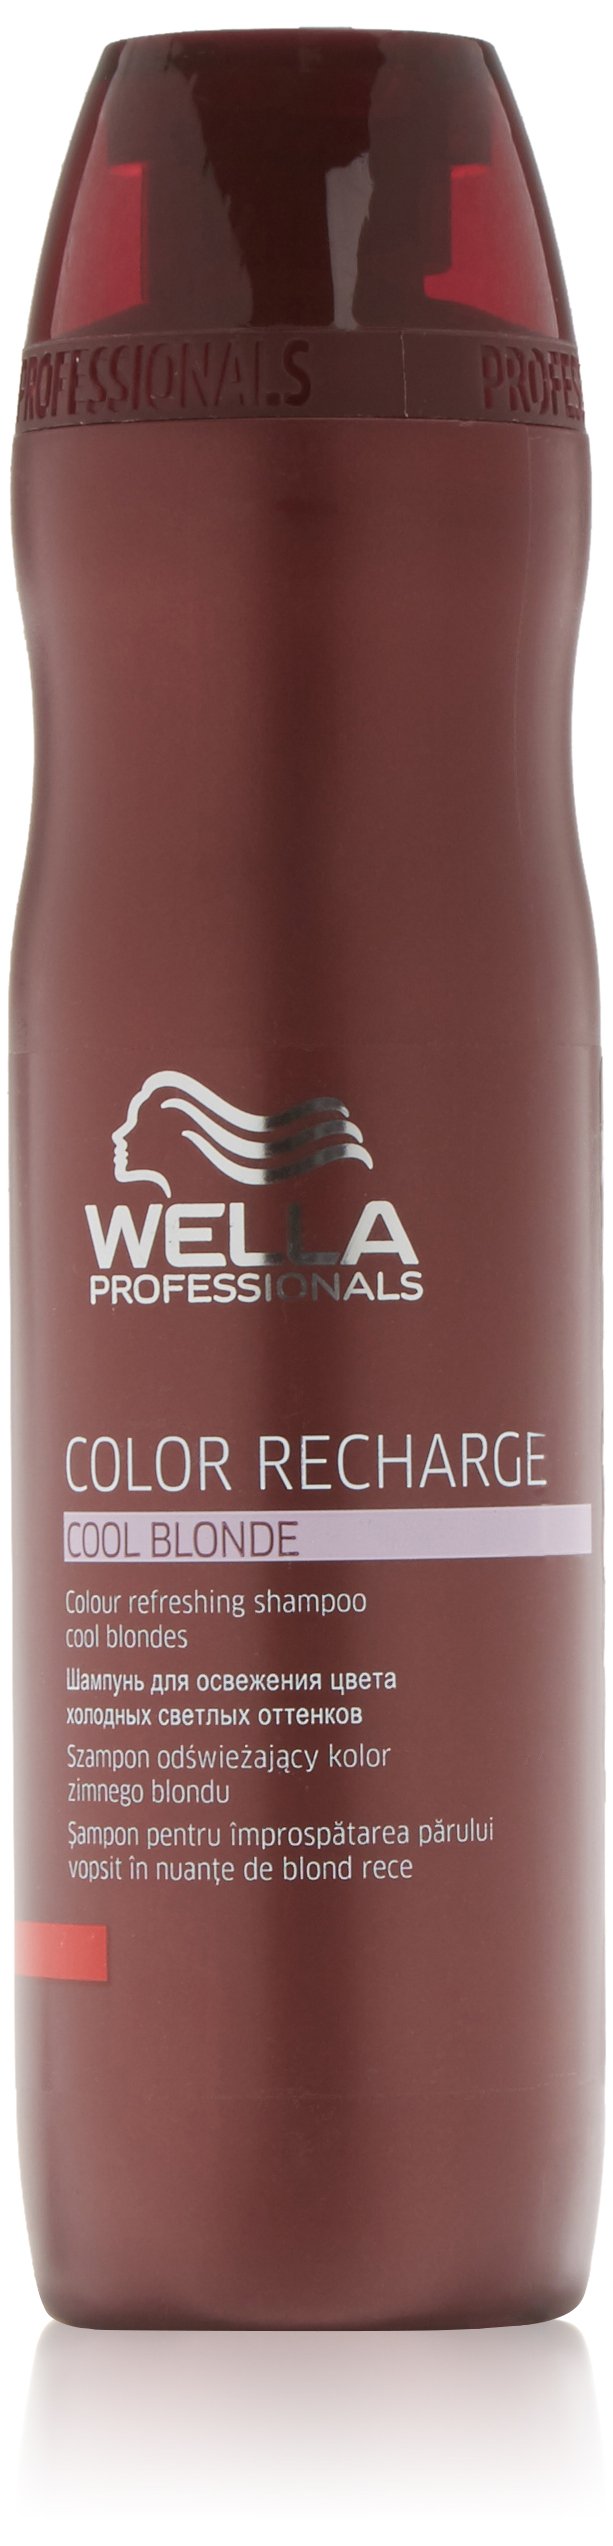 wella color recharge szampon red shampoo